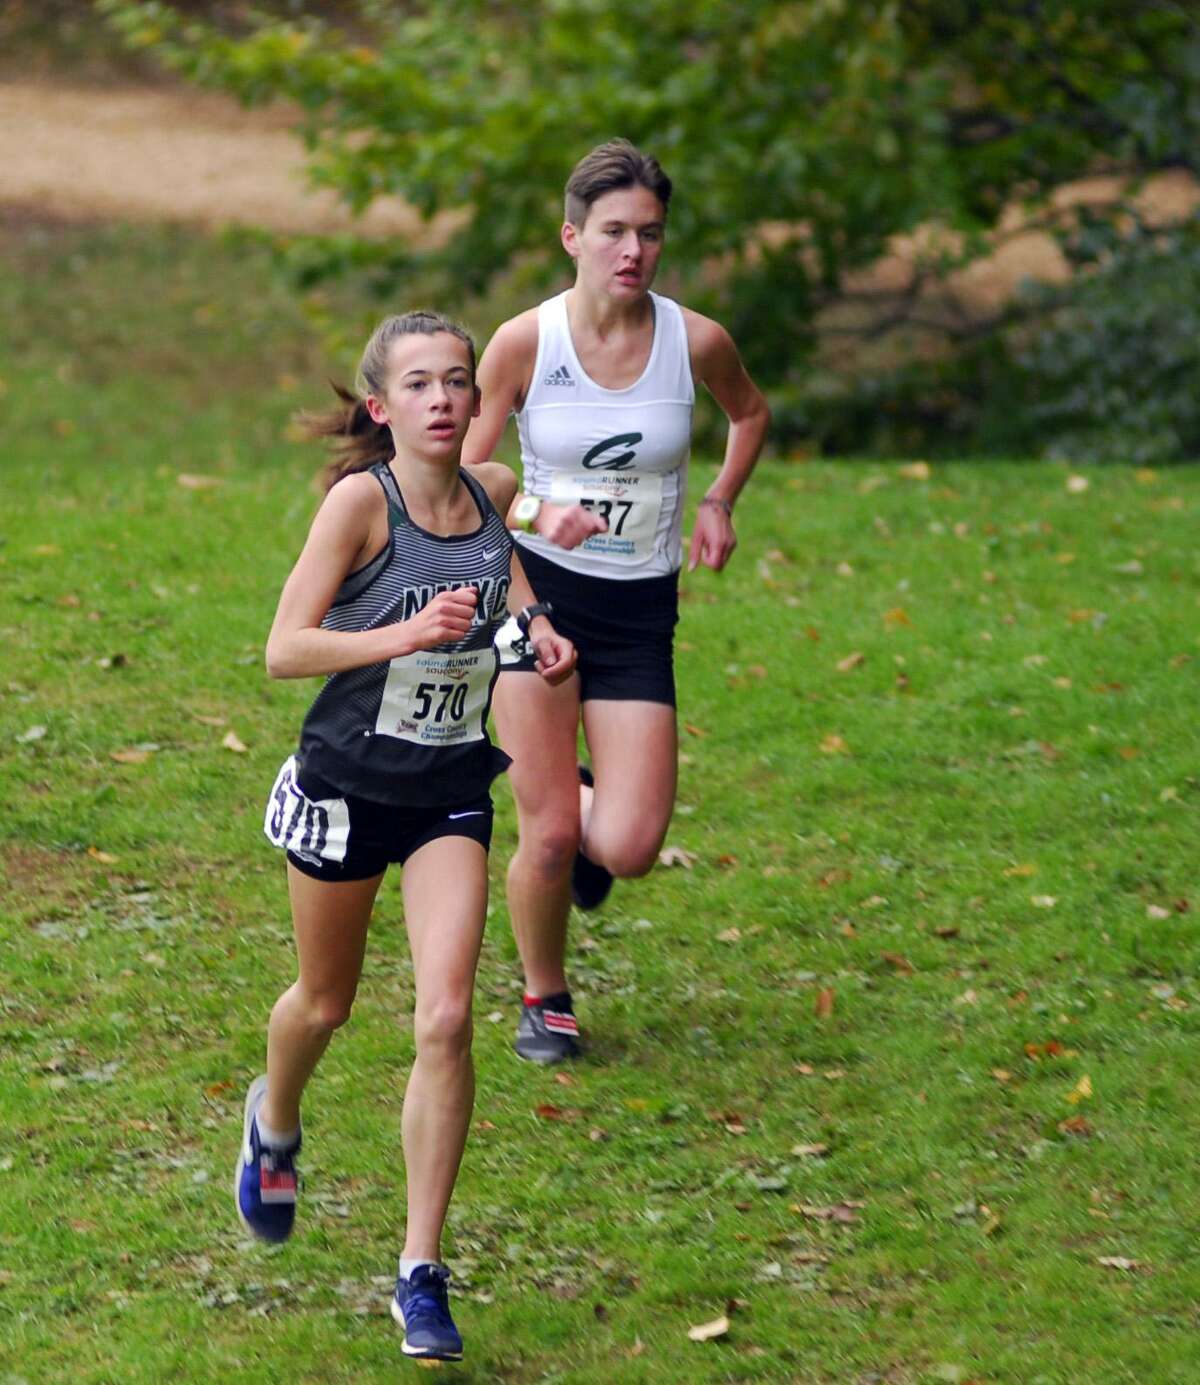 New Milford’s Claire Daniels, left, is ahead of Guilford’s Meredith Bloss during the Class L race on Friday.